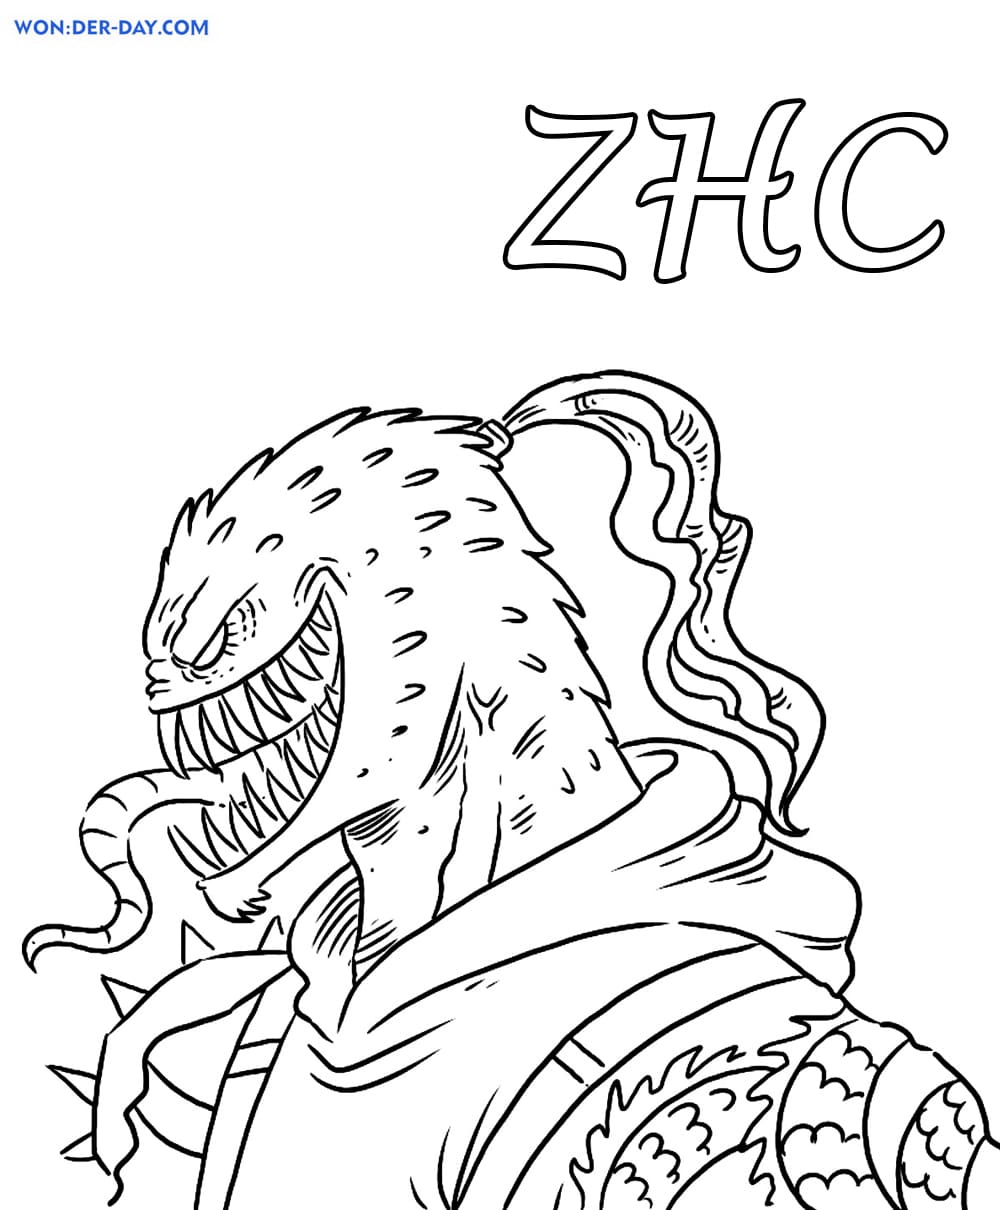 Zhc Coloring Pages Free Coloring Pages Wonder Day